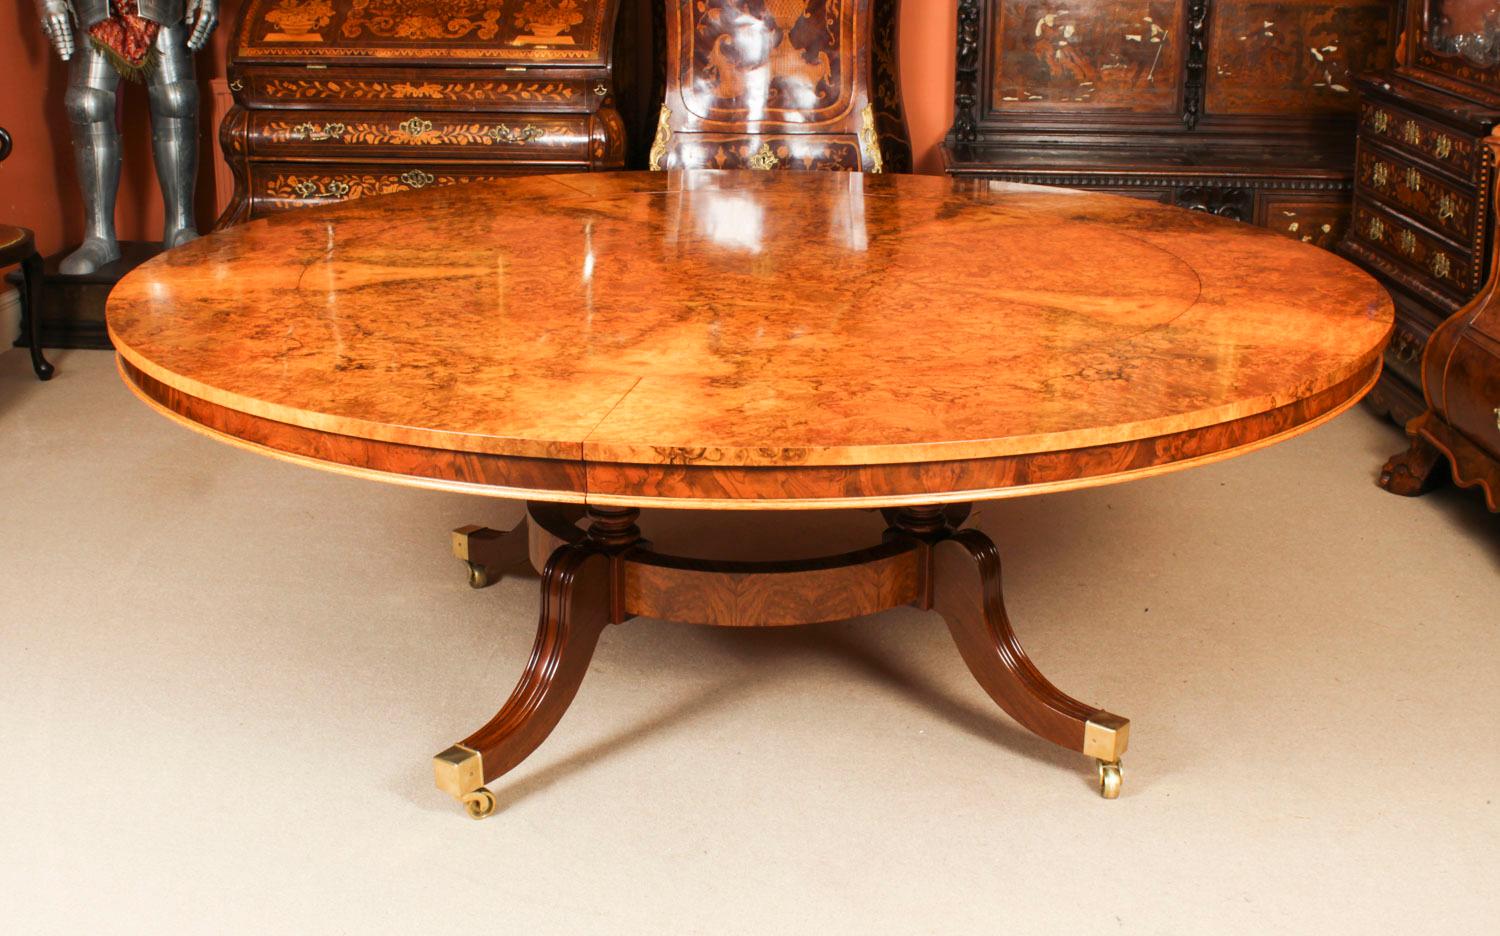 This is a beautiful and rare antique Regency Revival burr walnut extending dining table  in the manner of Johnstone Jupe & Co,  Circa 1900 in date, attributed to Arthur Brett & Sons, Norfolk, England, with a set of ten vintage rope back dining